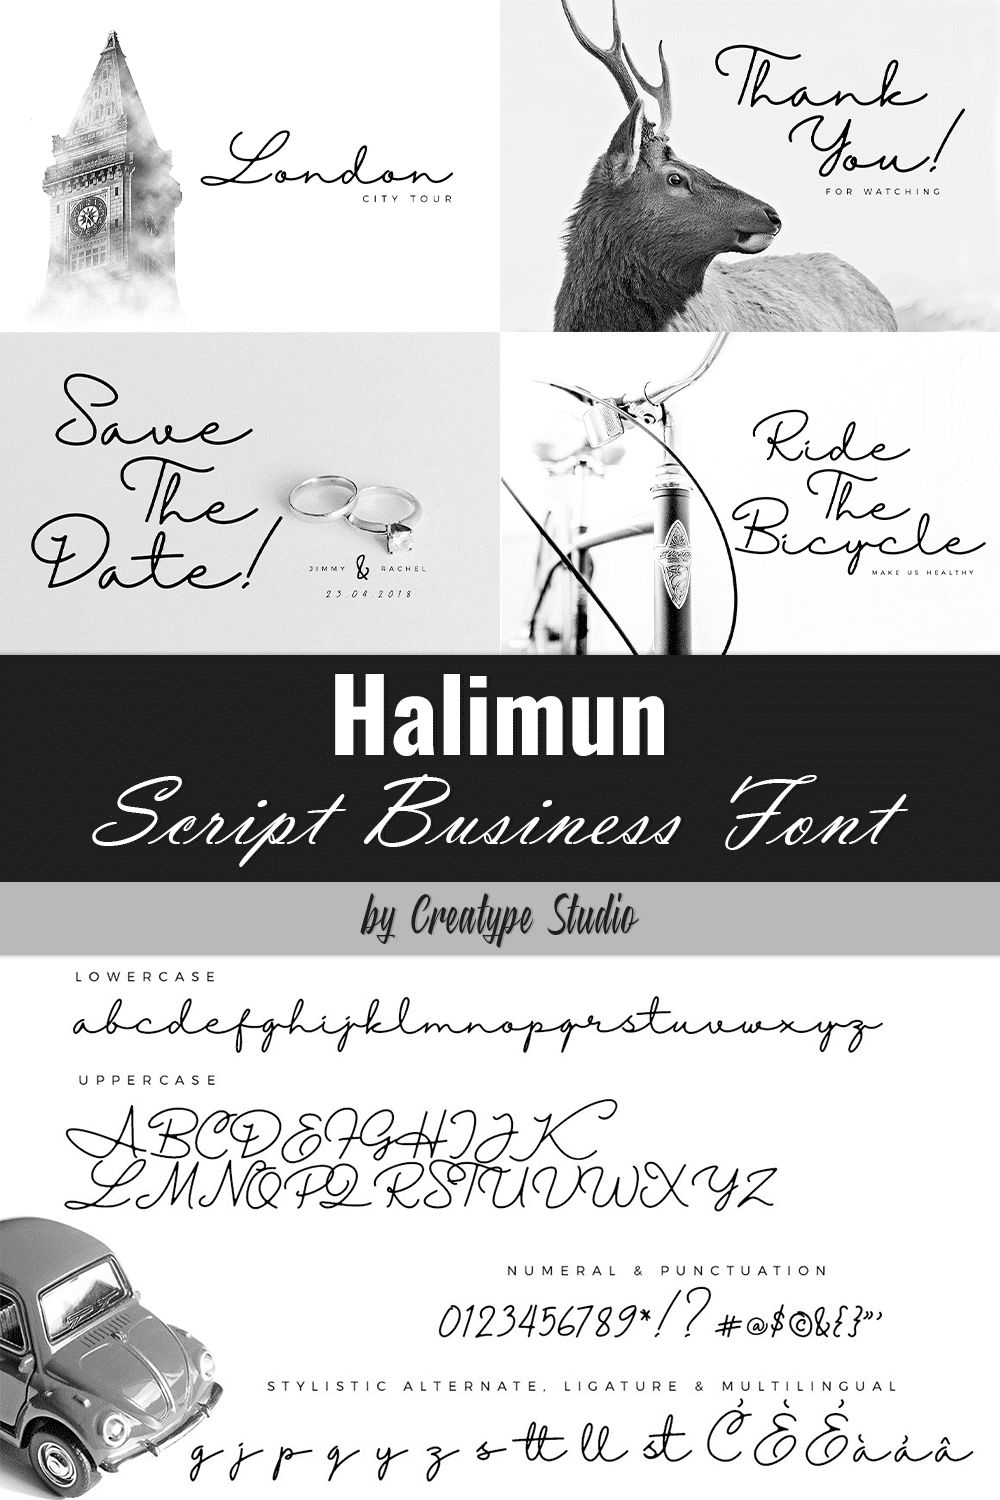 A collage of examples of the use of the Halimun font.